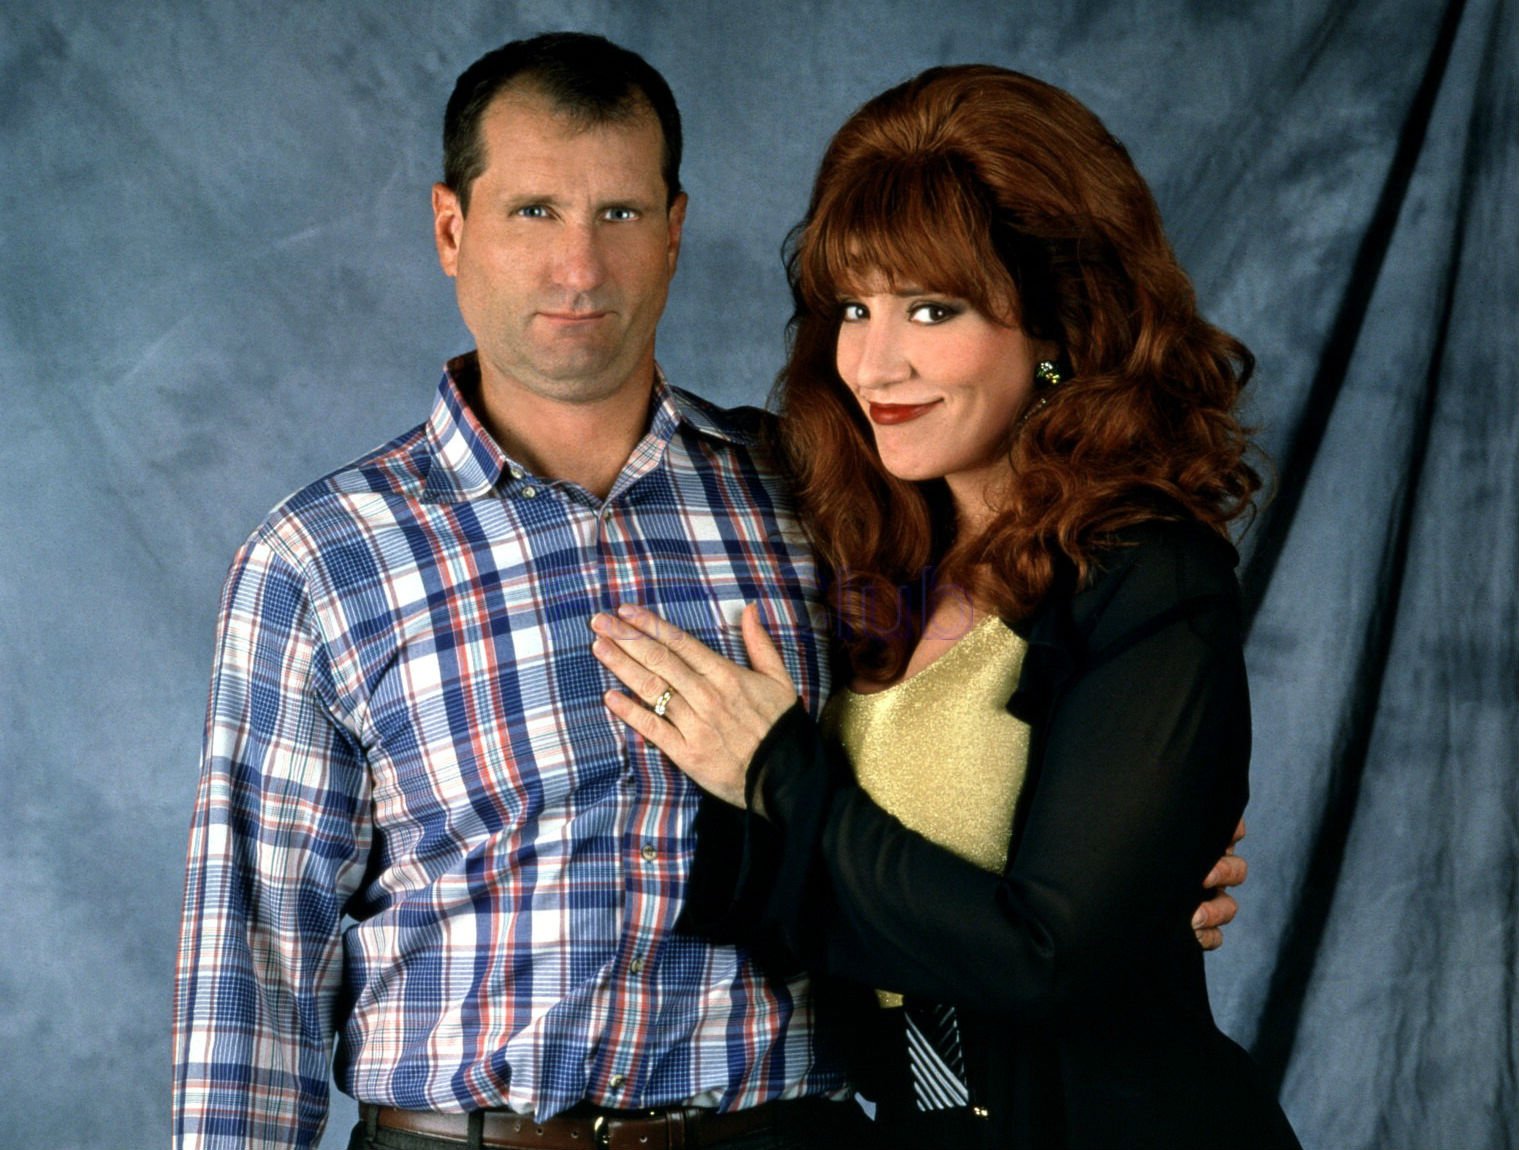 married with children, Comedy, Sitcom, Series, Television, Married, Children Wallpaper